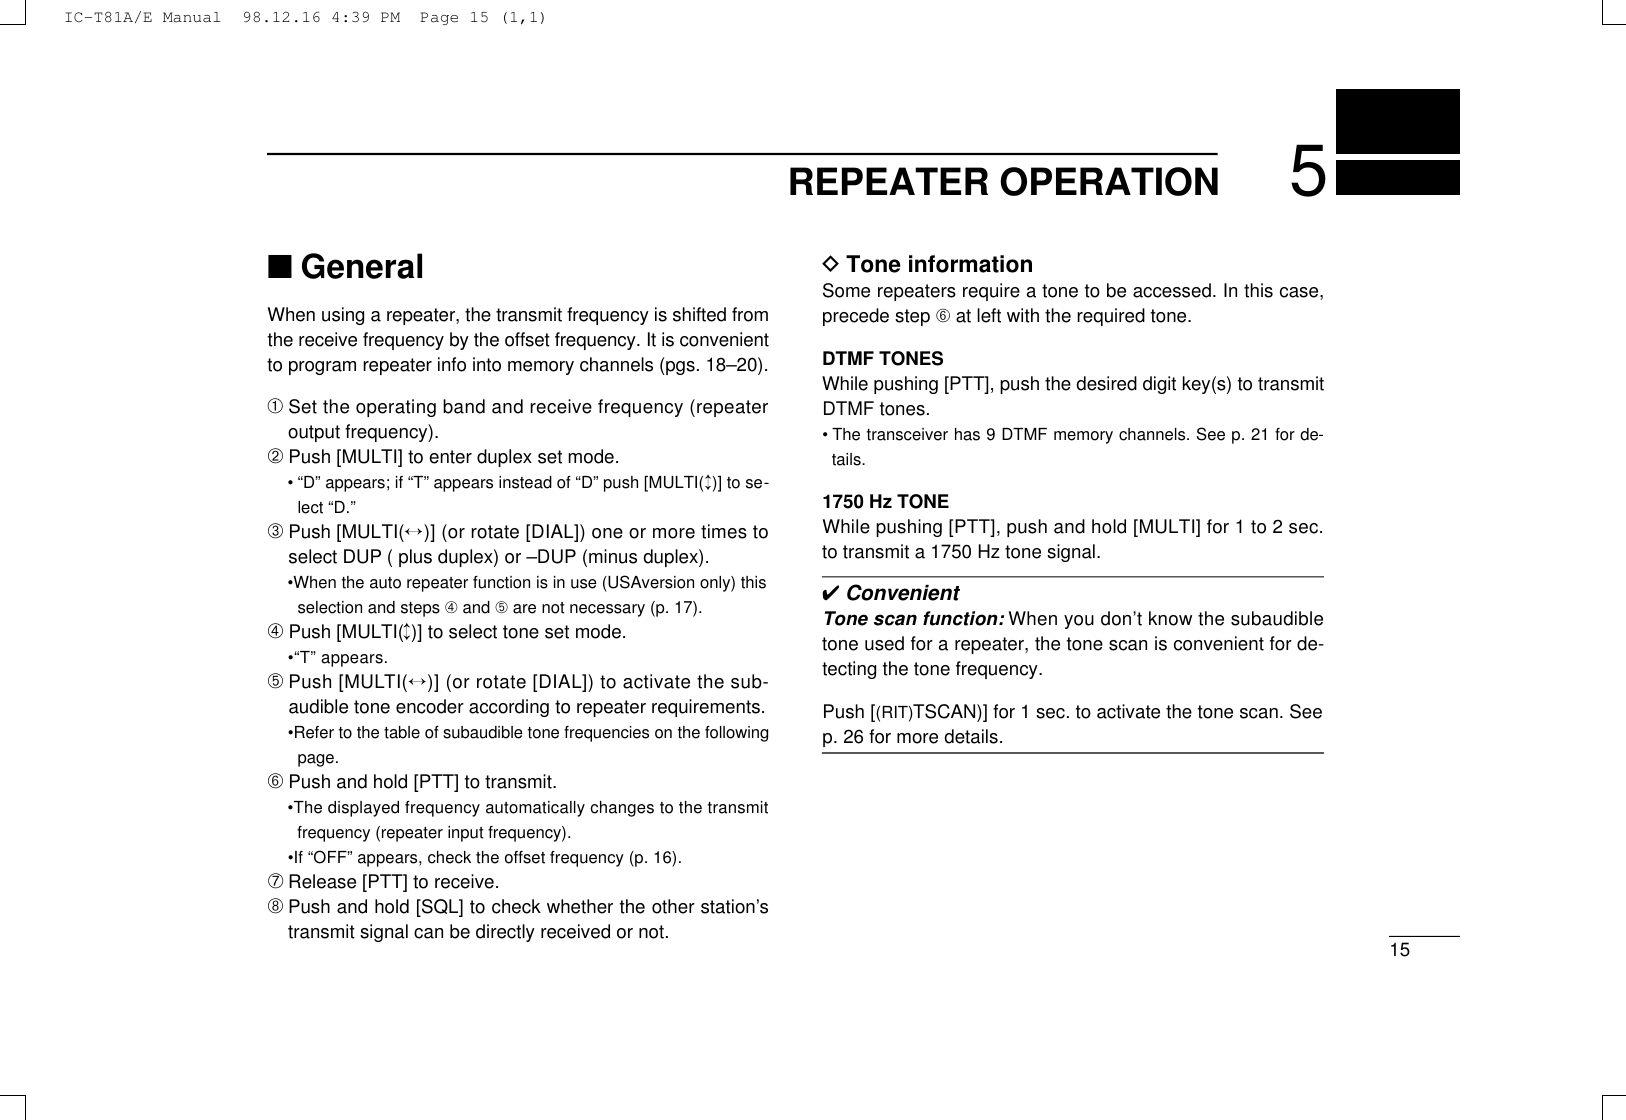 155REPEATER OPERATION■GeneralWhen using a repeater, the transmit frequency is shifted fromthe receive frequency by the offset frequency. It is convenientto program repeater info into memory channels (pgs. 18–20).➀Set the operating band and receive frequency (repeateroutput frequency).➁Push [MULTI] to enter duplex set mode.• “D” appears; if “T” appears instead of “D” push [MULTI(↕)] to se-lect “D.”➂Push [MULT I (↔)] (or rotate [DIAL]) one or more times toselect DUP ( plus duplex) or –DUP (minus duplex).•When the auto repeater function is in use (USAversion only) thisselection and steps ➃and ➄are not necessary (p. 17).➃Push [MULTI(↕)] to select tone set mode.•“T” appears.➄Push [MULT I (↔)] (or rotate [DIAL]) to activate the sub-audible tone encoder according to repeater requirements.•Refer to the table of subaudible tone frequencies on the followingpage.➅Push and hold [PTT] to transmit.•The displayed frequency automatically changes to the transmitfrequency (repeater input frequency).•If “OFF” appears, check the offset frequency (p. 16).➆Release [PTT] to receive.➇Push and hold [SQL] to check whether the other station’stransmit signal can be directly received or not.DTone informationSome repeaters require a tone to be accessed. In this case,precede step ➅at left with the required tone.DTMF TONESWhile pushing [PTT], push the desired digit key(s) to transmitDTMF tones.•The transceiver has 9 DTMF memory channels. See p. 21 for de-tails.1750 Hz TONEWhile pushing [PTT], push and hold [MULTI] for 1 to 2 sec.to transmit a 1750 Hz tone signal.✔ConvenientTone scan function: When you don’t know the subaudibletone used for a repeater, the tone scan is convenient for de-tecting the tone frequency.Push [(RIT)TSCAN)] for 1 sec. to activate the tone scan. Seep. 26 for more details.IC-T81A/E Manual  98.12.16 4:39 PM  Page 15 (1,1)